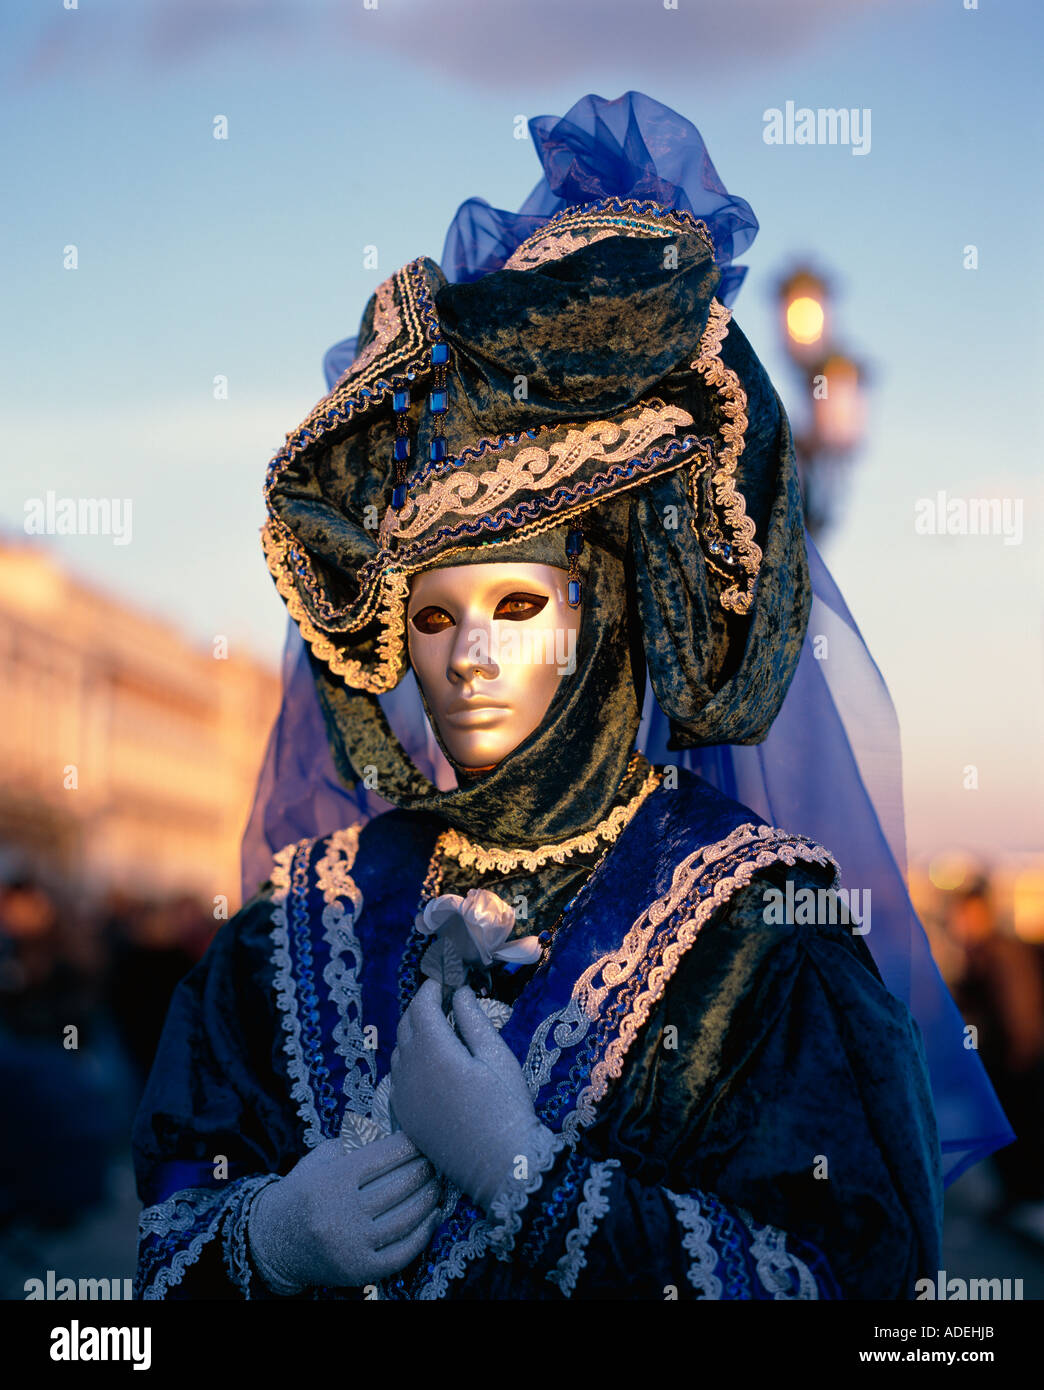 Italy Venice Carnival. Woman wearing face mask and costume. Stock Photo